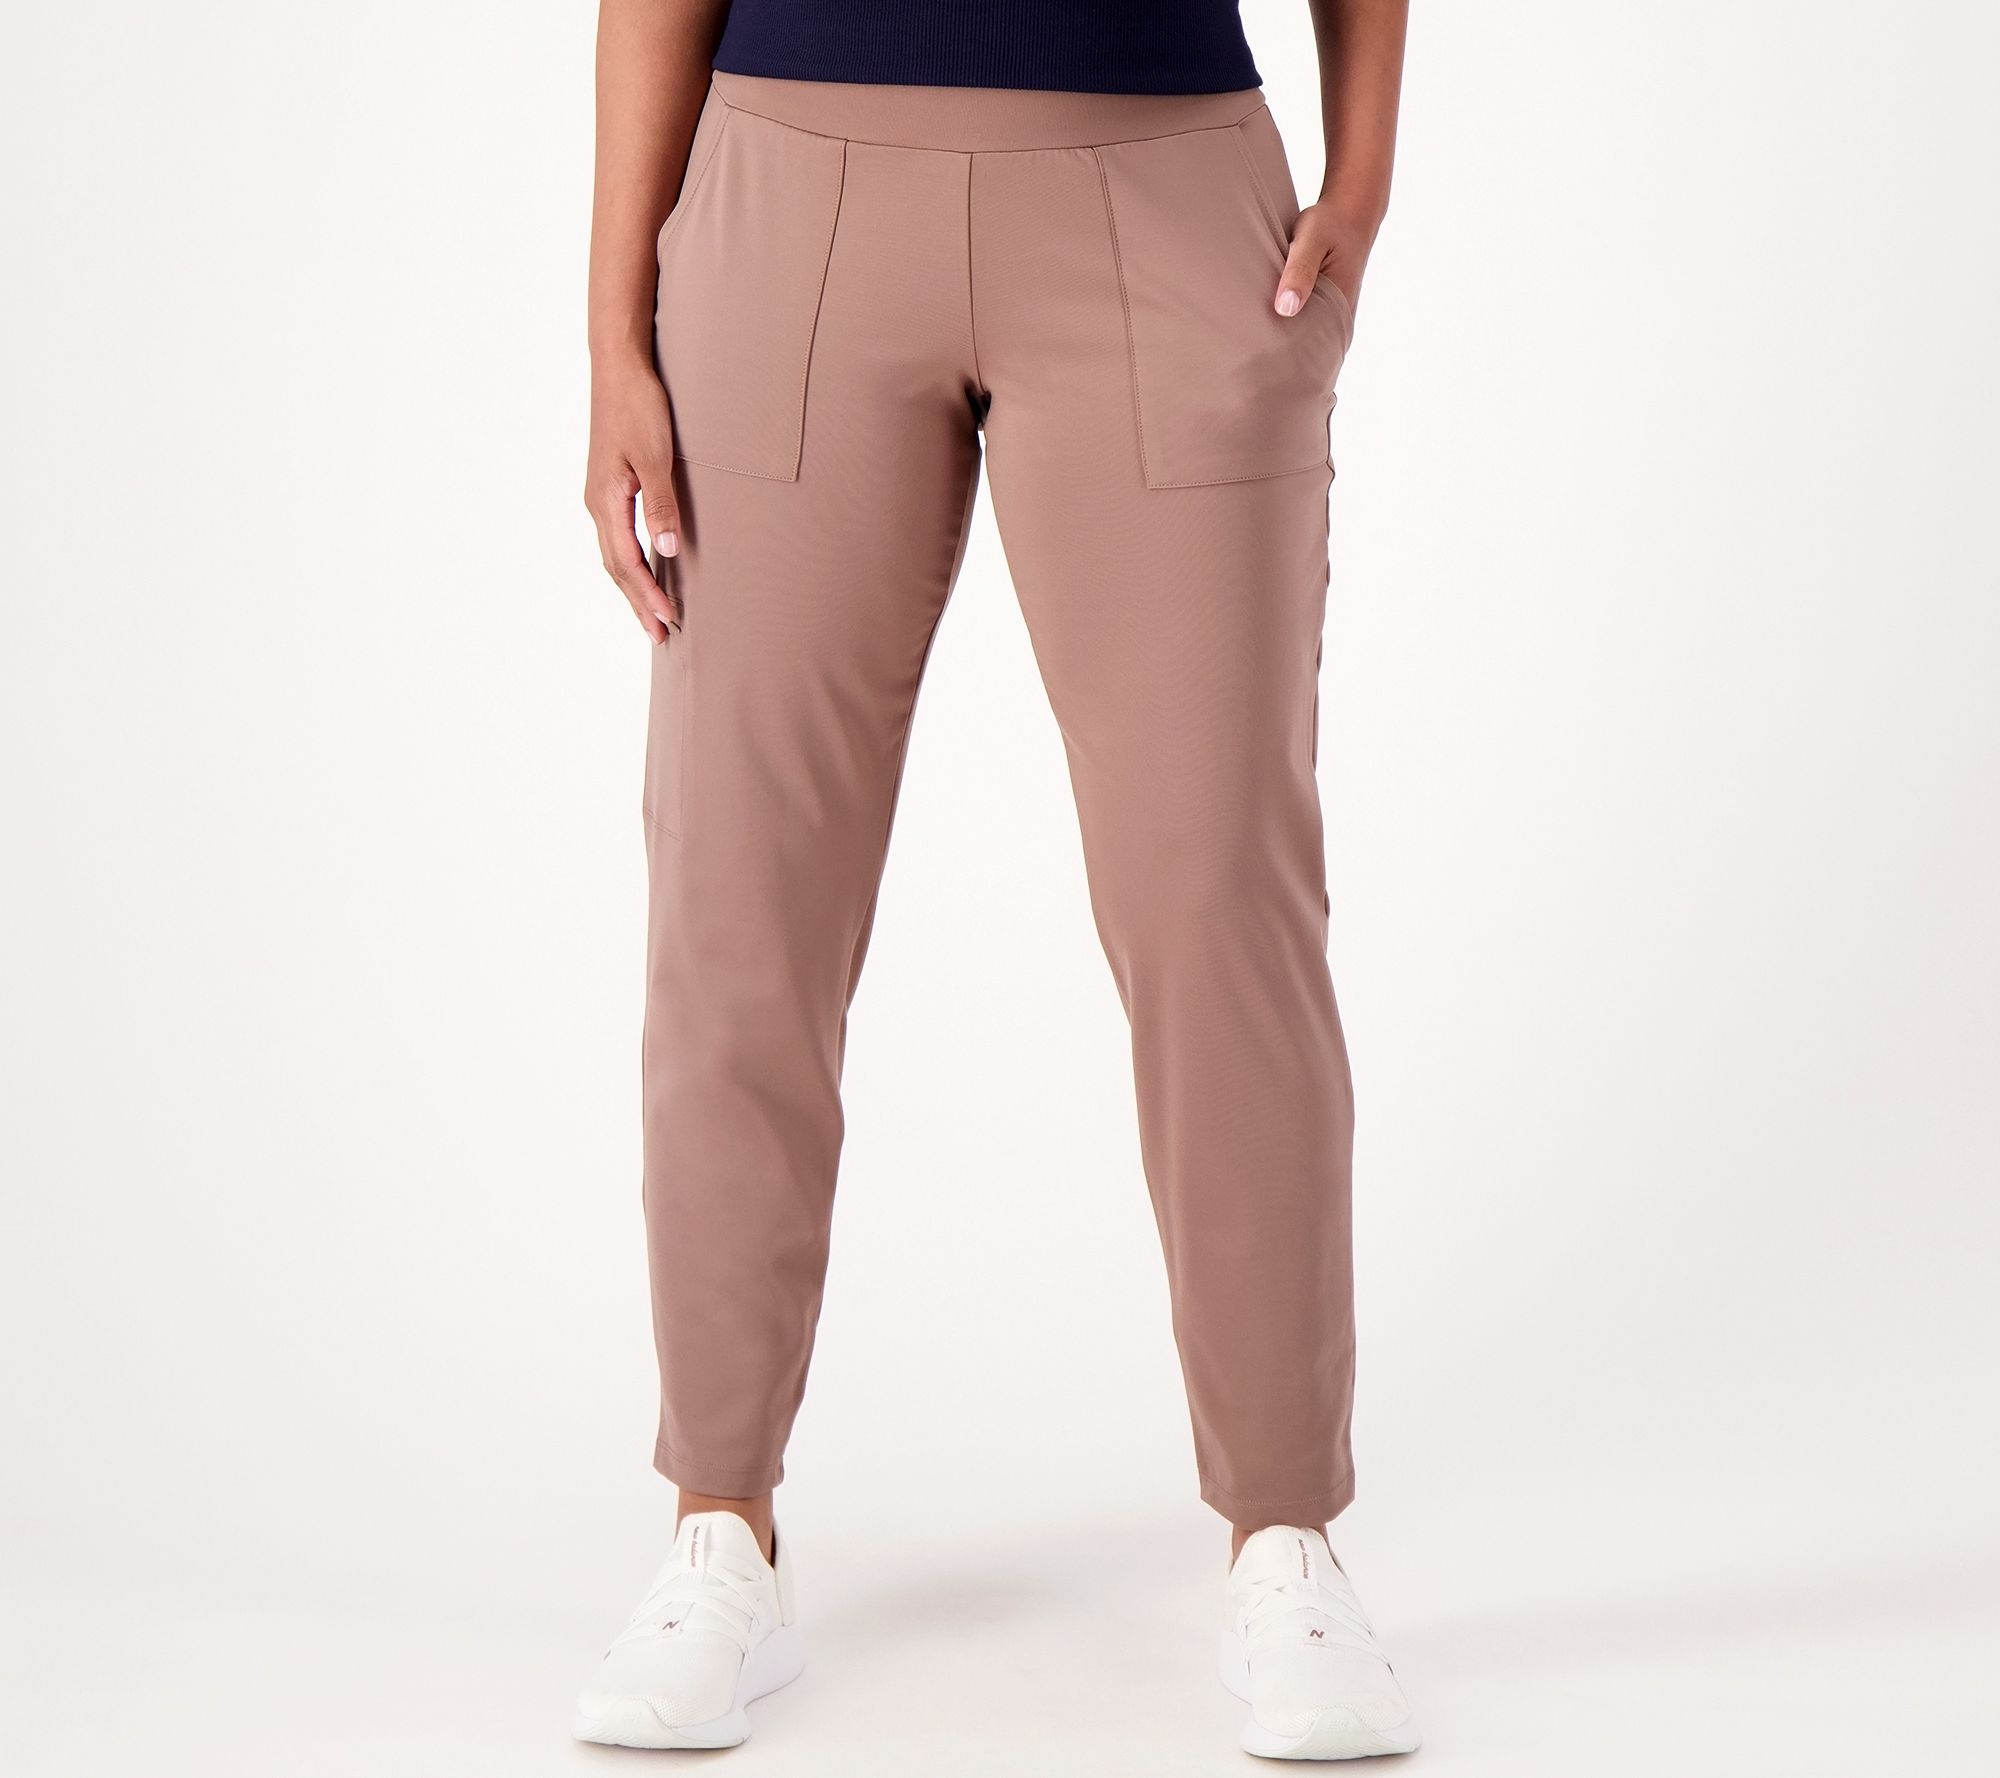 zuda Stretch Woven Pant with Ruching Detail 